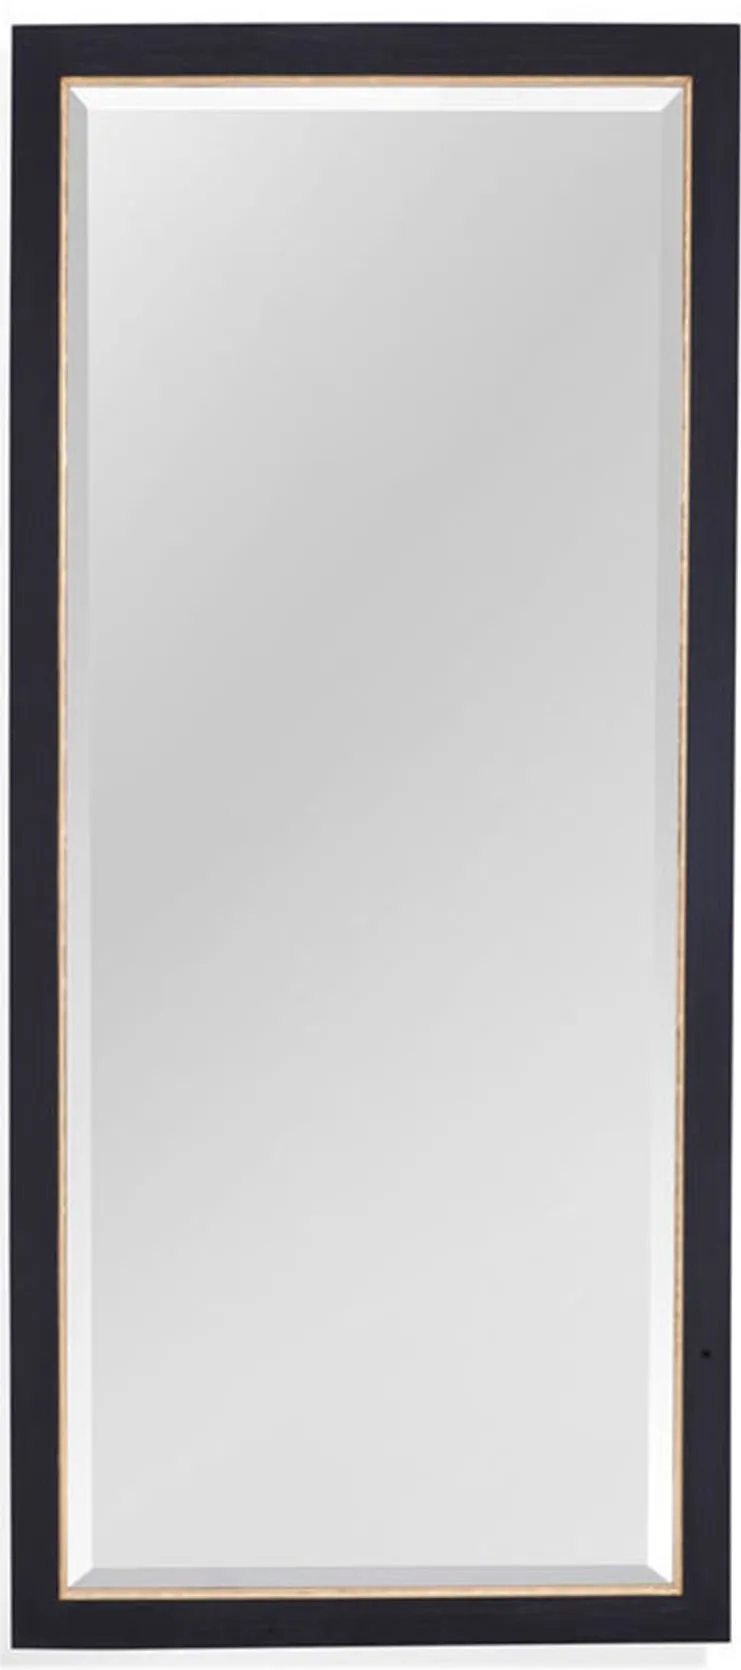 Black and Gold Beveled Leaner Mirror 36"W x 78"H